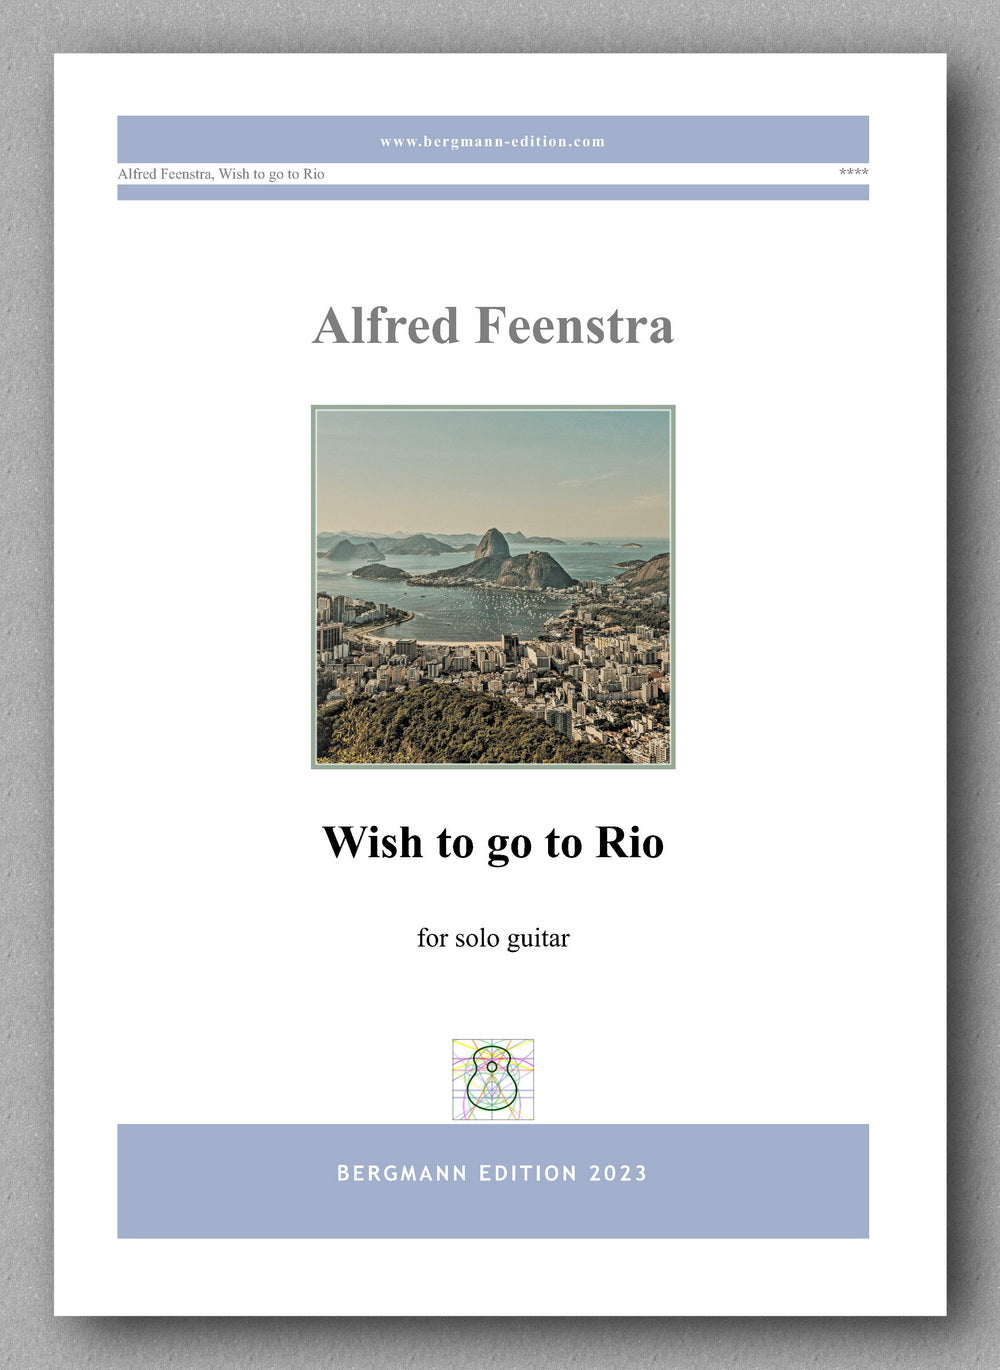 Feenstra, Wish to go to Rio - preview of the cover